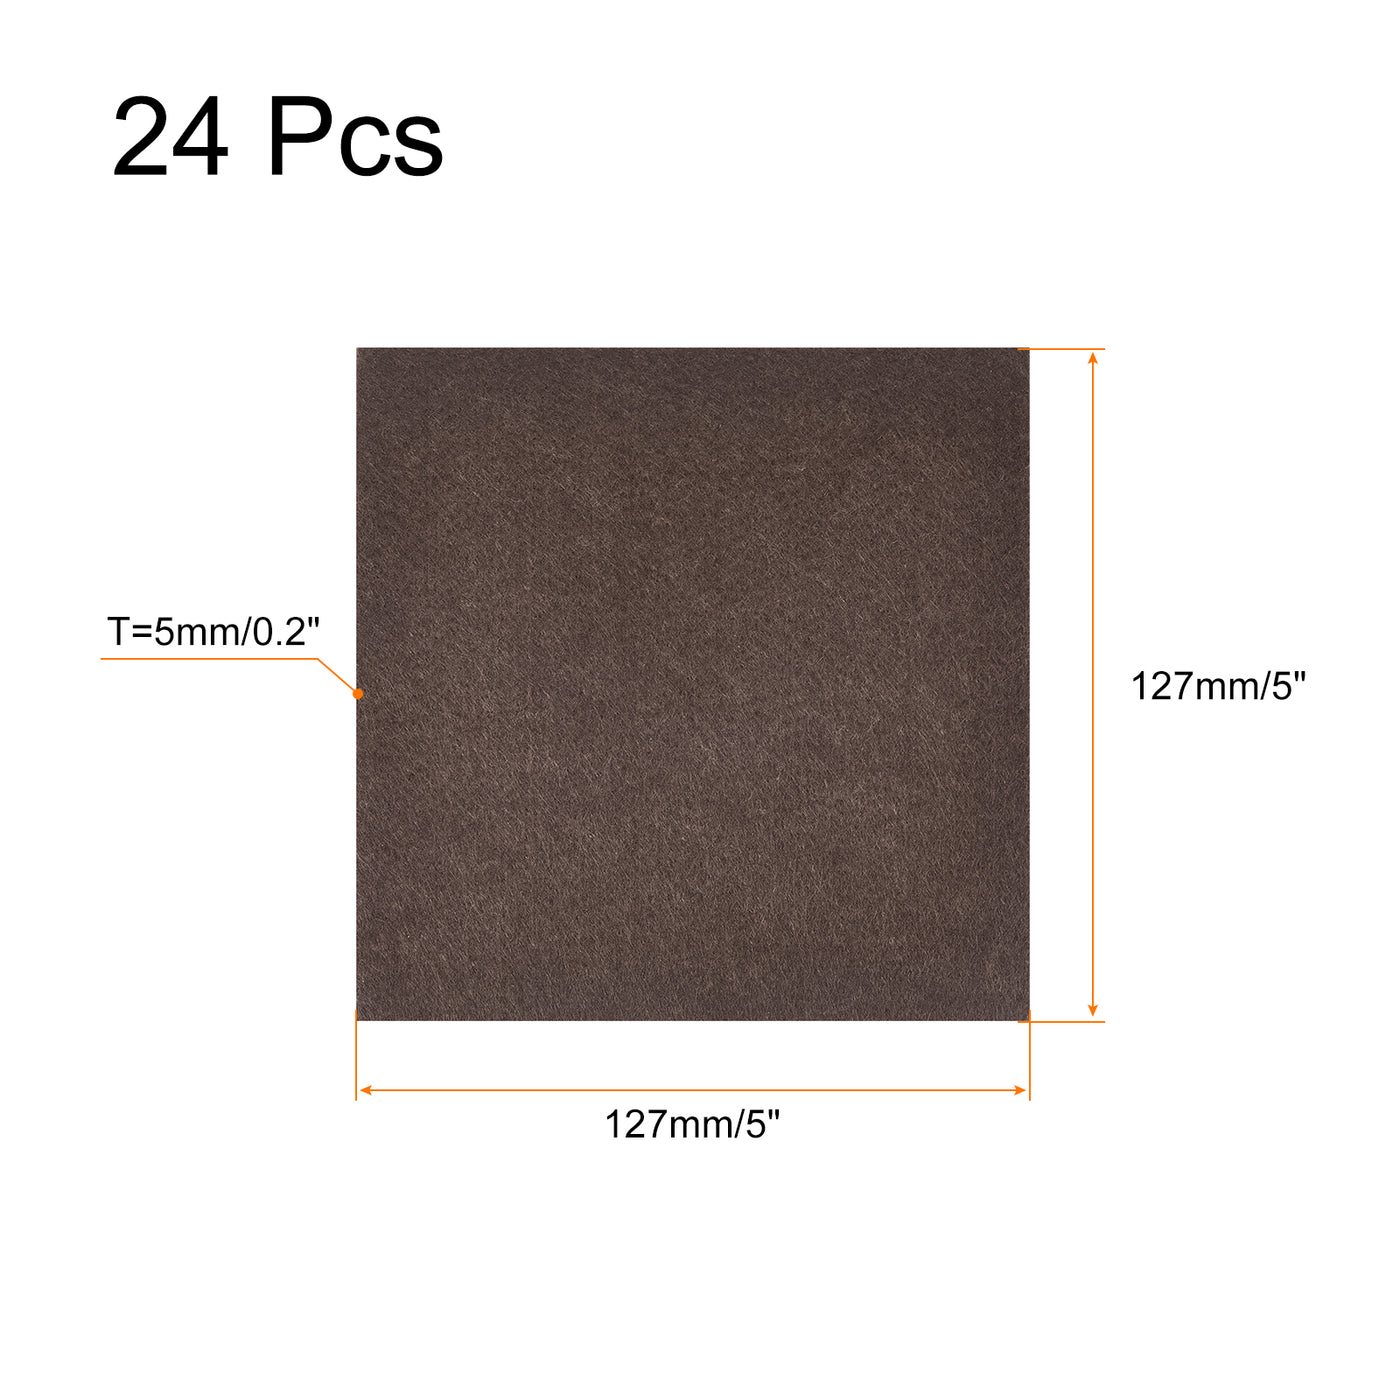 uxcell Uxcell Felt Furniture Pads, 127mm x 127mm Self Adhesive Square Floor Protectors for Furniture Legs Hardwood Floor, Brown 24Pcs